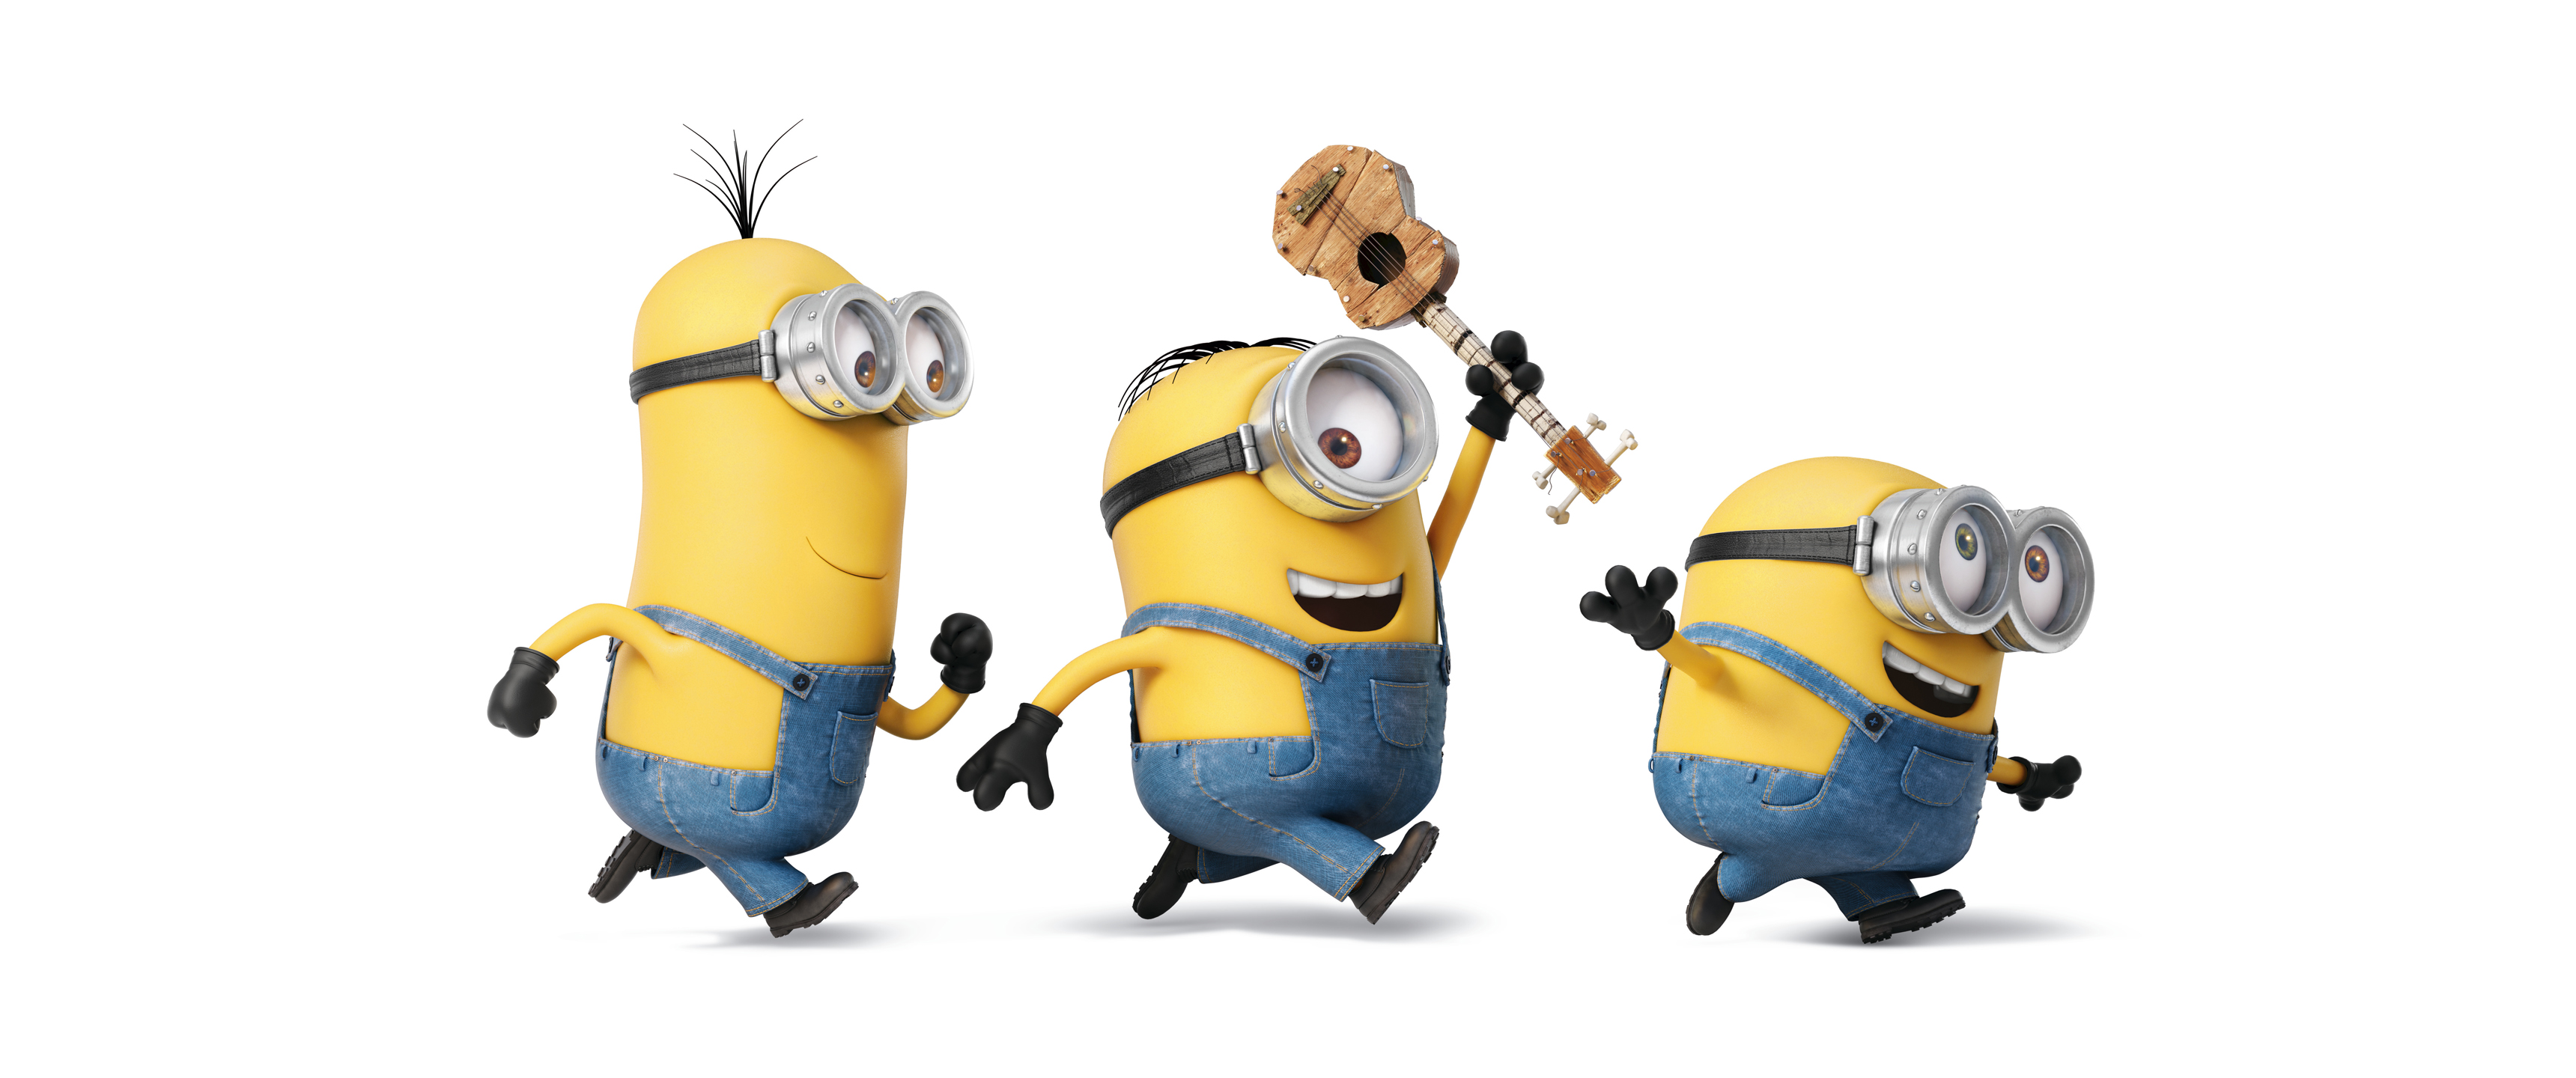 General 3440x1440 simple background white background minimalism goggles minions movie characters